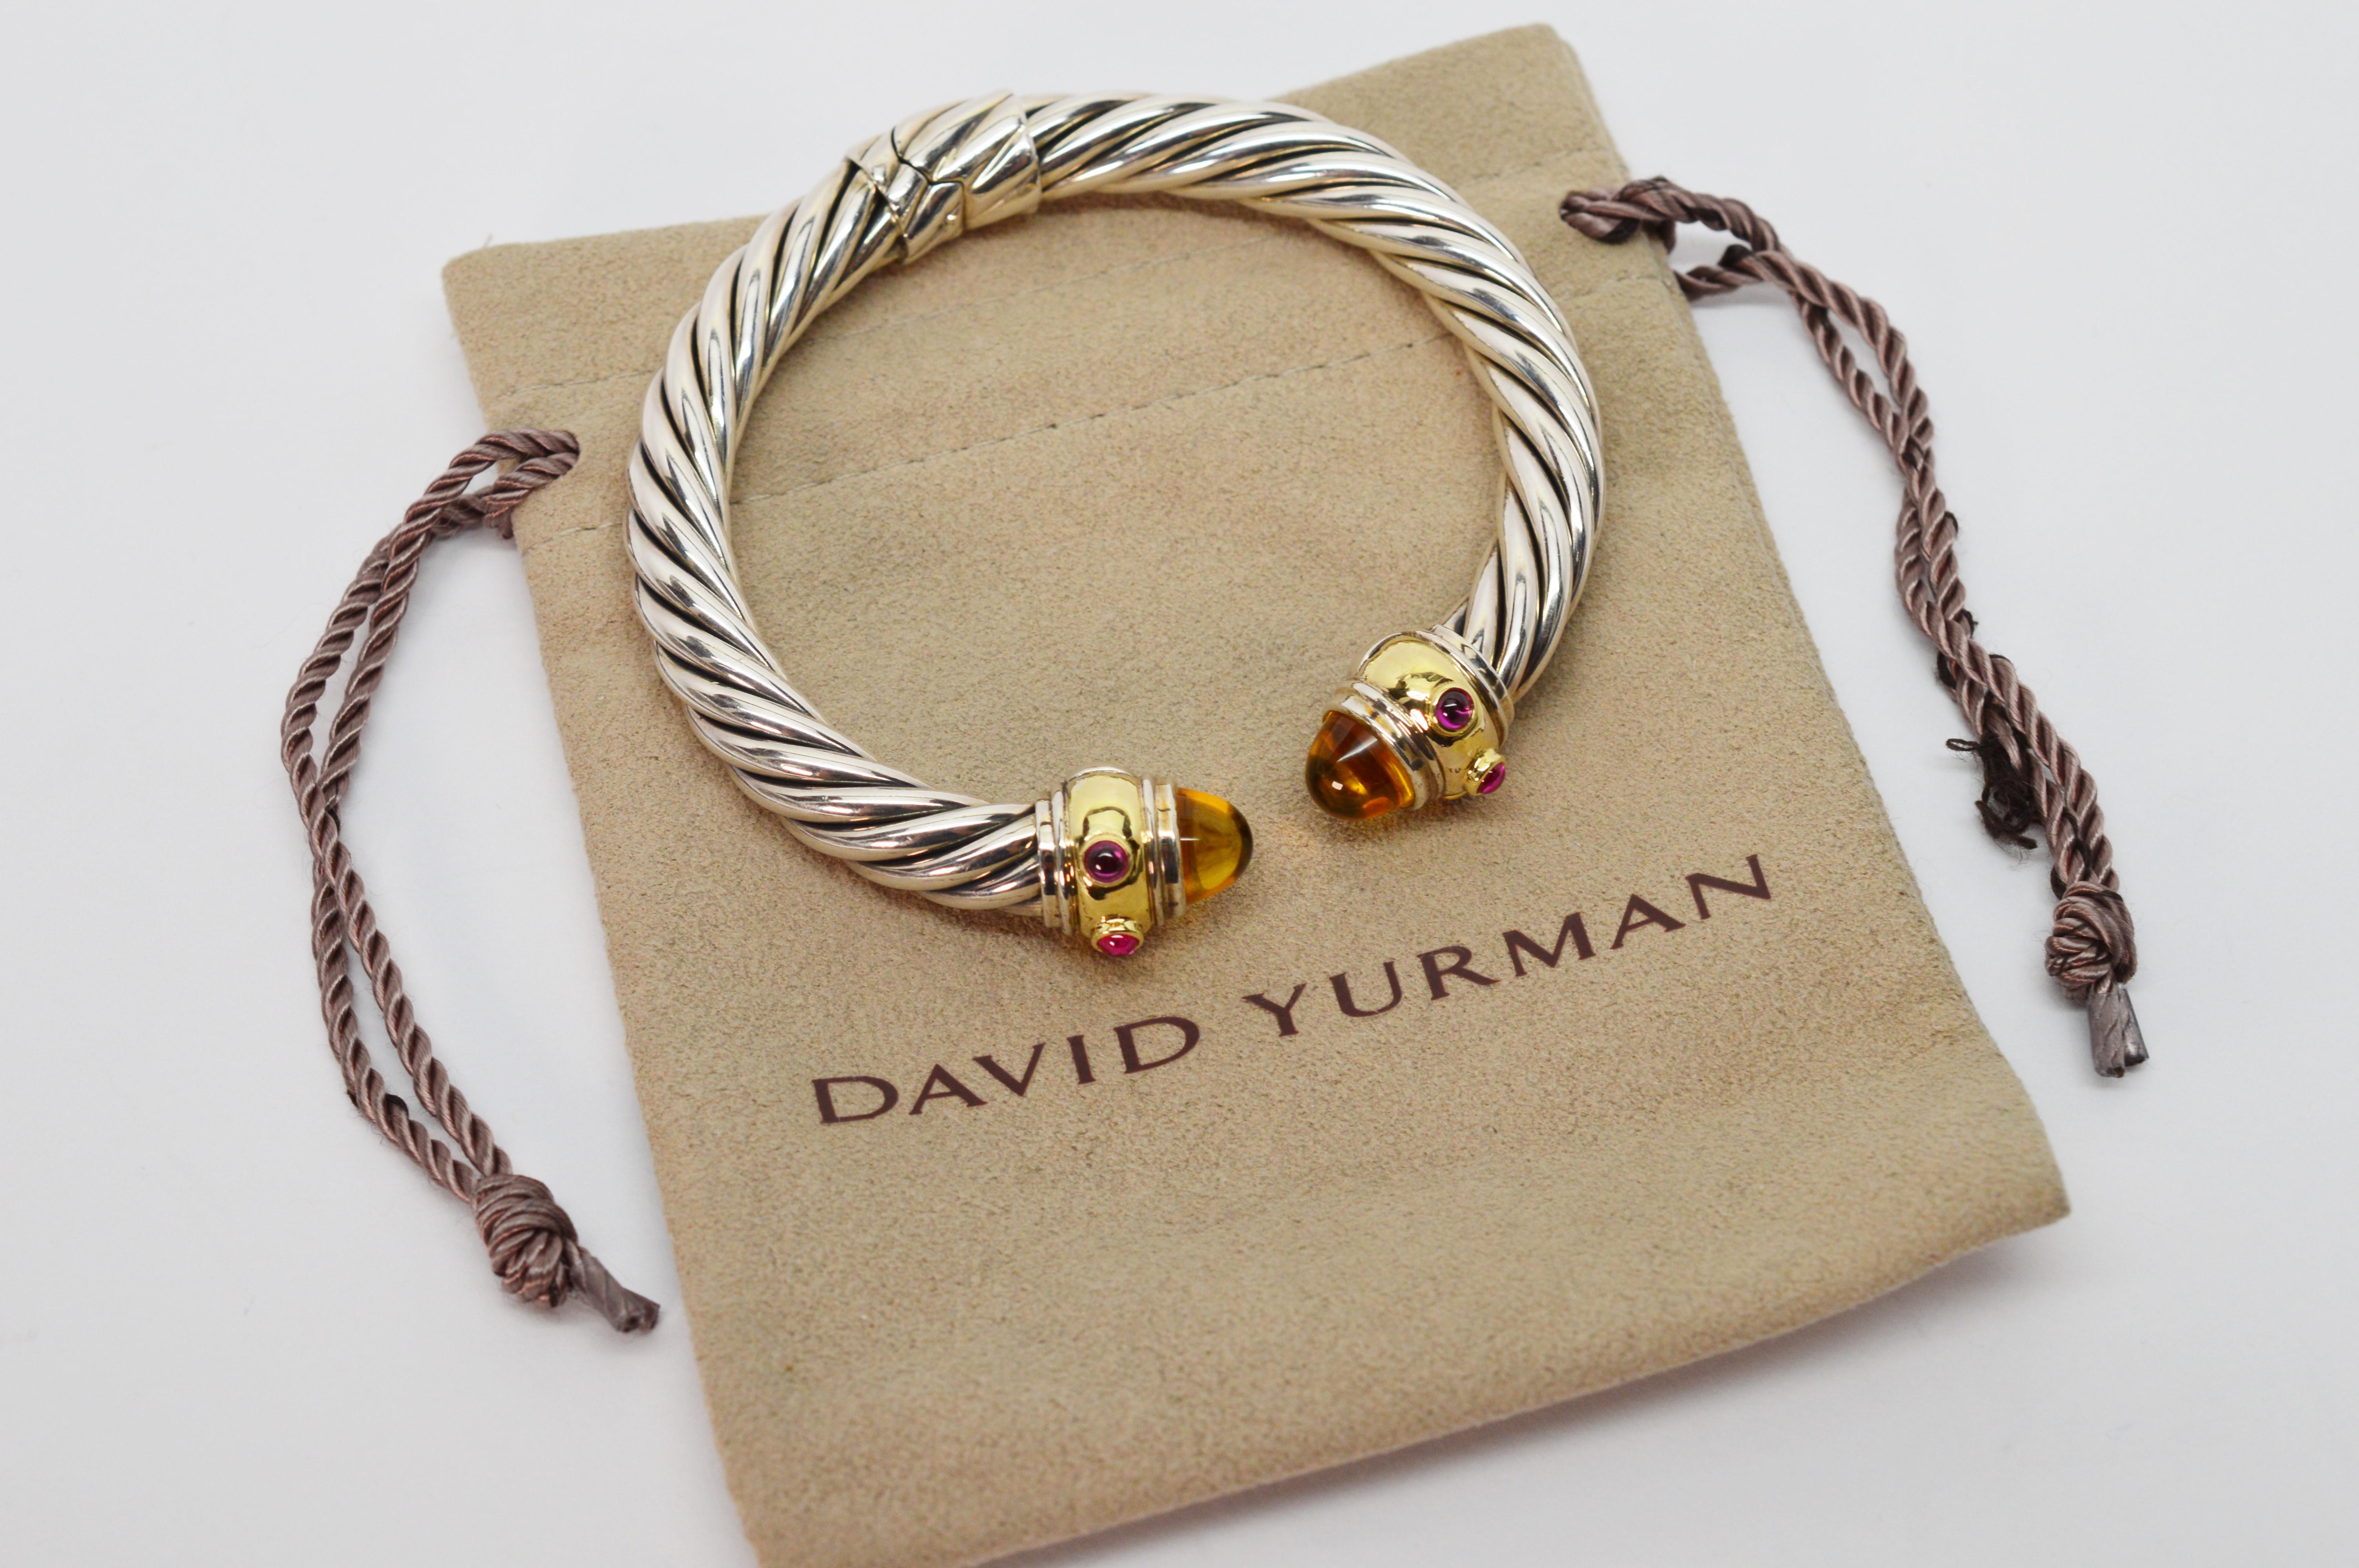 Vibrant citrine pyramid cabochon with ruby cabochon accents enhanced by fourteen karat 14K yellow gold add artful color to this David Yurman Sterling Silver Classic Cable Cuff Bracelet. 
This iconic DY design has an overall measurement of 2-3/4 x